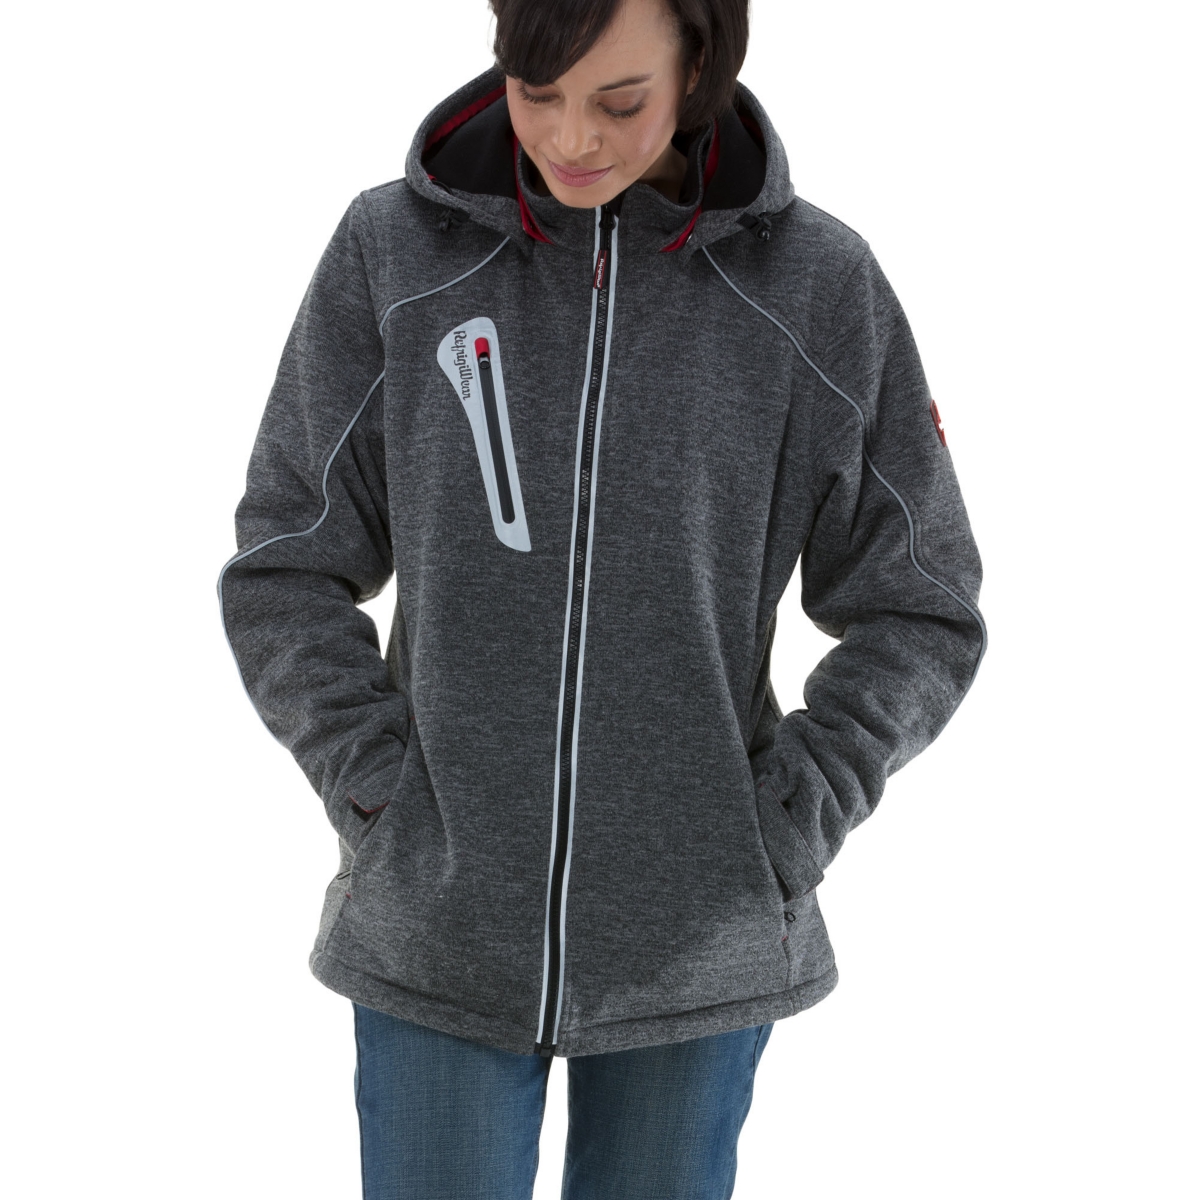 Women's Fleece Lined Extreme Sweater Jacket with Removable Hood - Grey